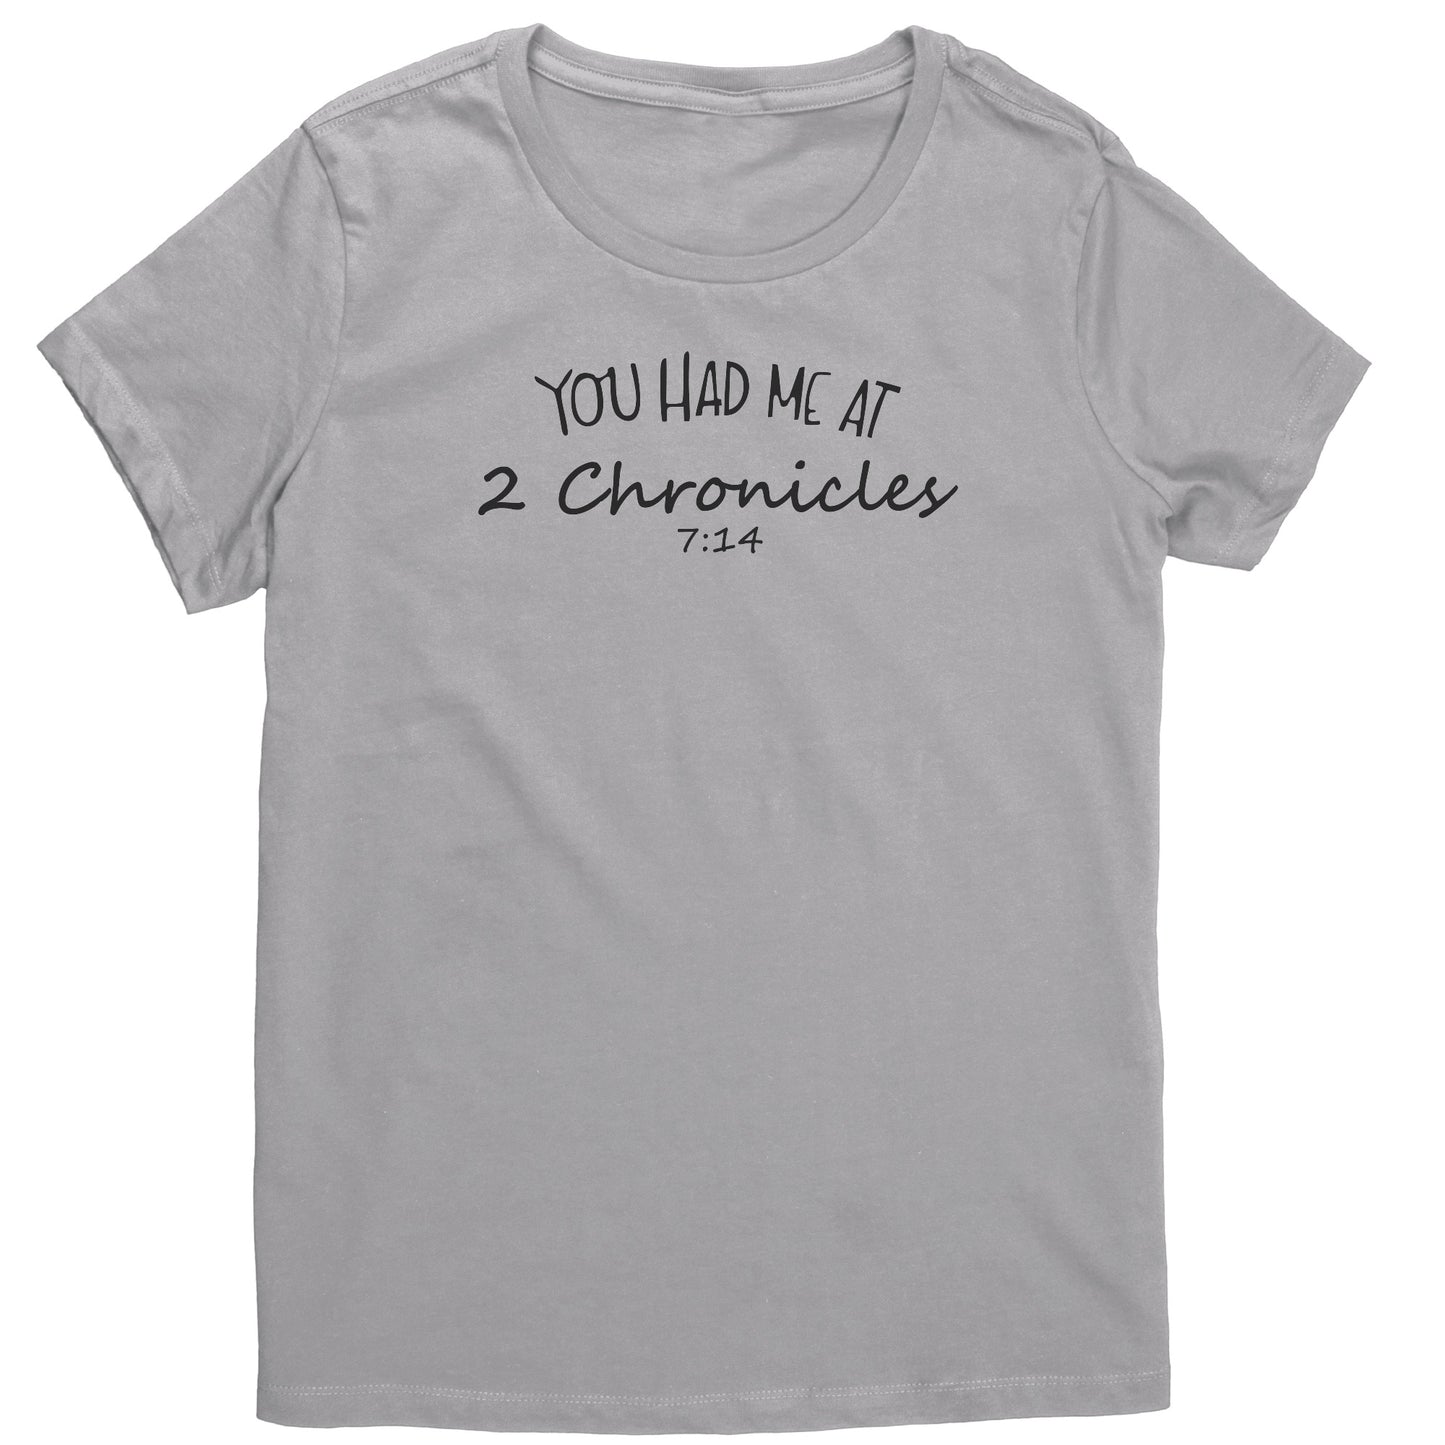 You Had Me At 2 Chronicles 7:14 Women's T-Shirt Part 1